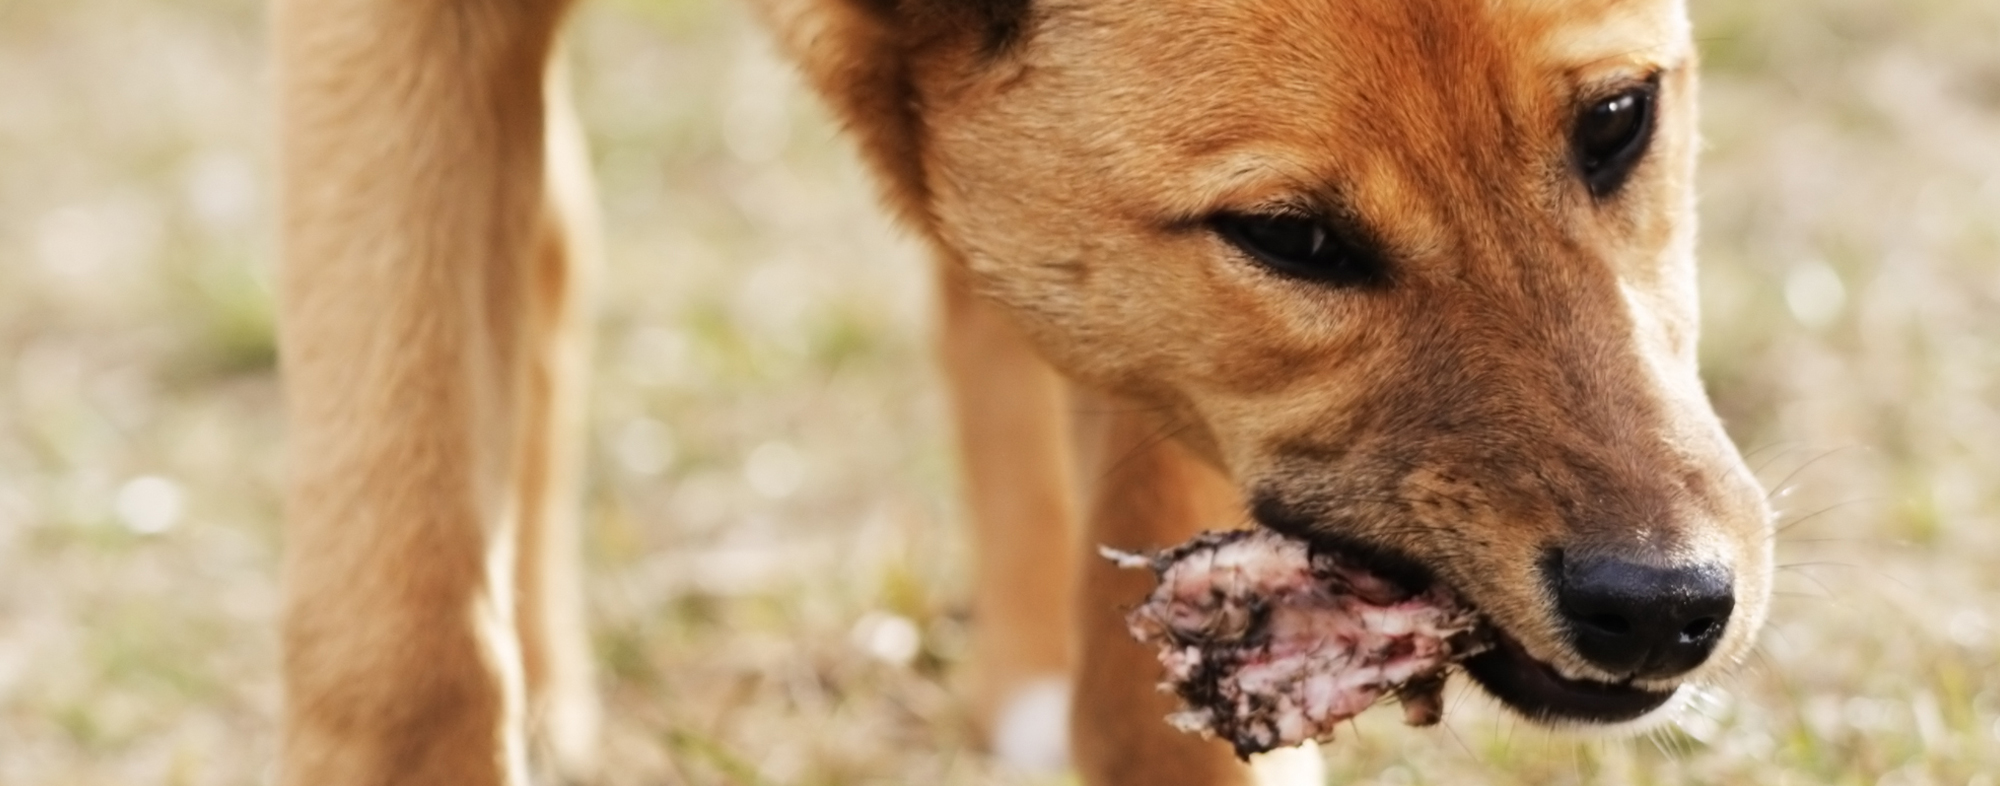 You should never feed your dog any pieces of raw meat